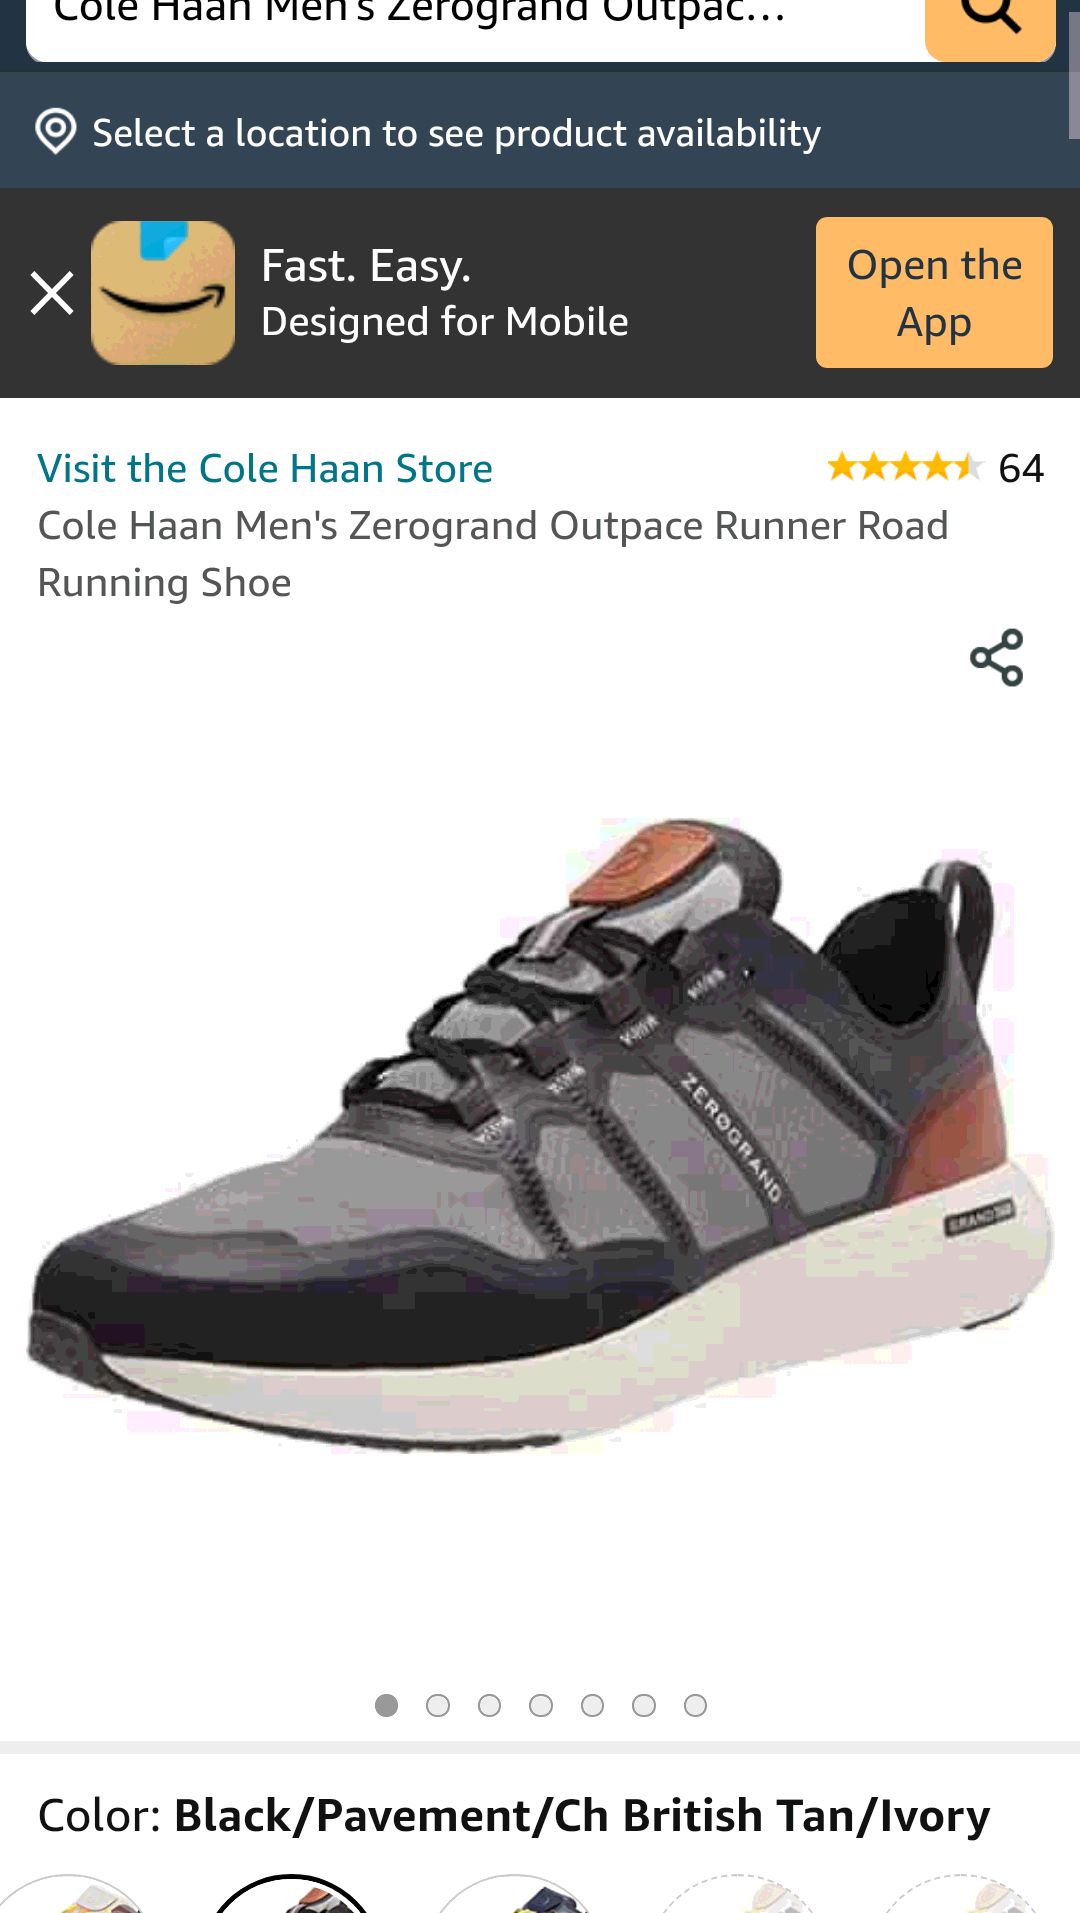 Cole Haan mens Zerogrand Outpace Runner Road Running Shoe, Black/Pavement/Ch British Tan/Ivory, 9.5 US | Road Running时尚男鞋